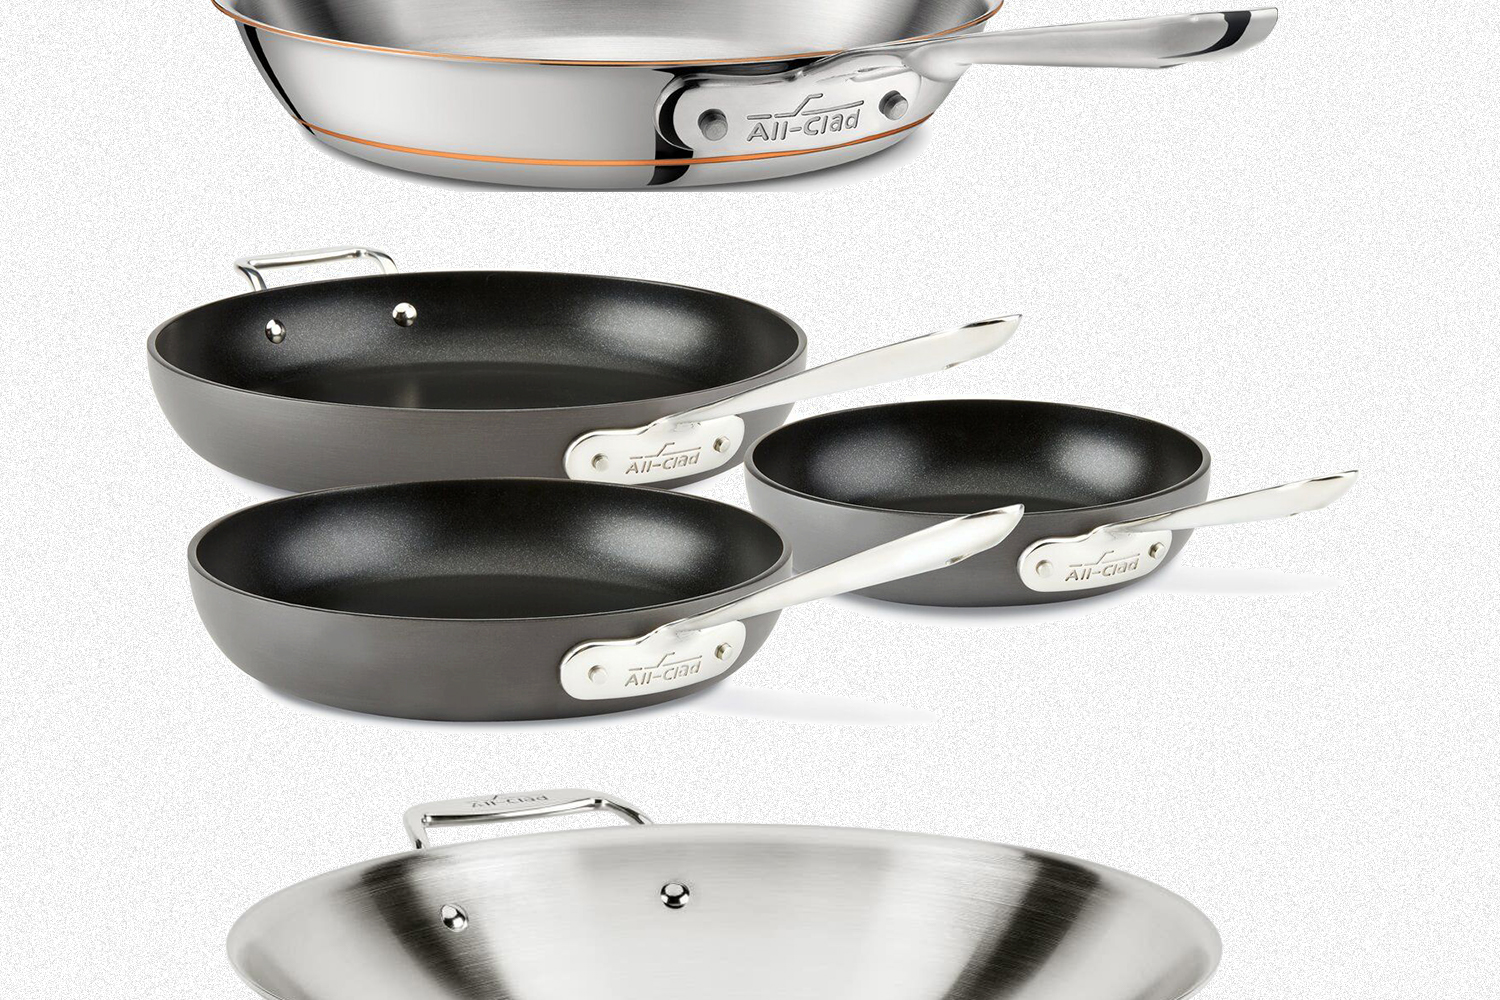 Take Up to 84% off Cookware During the All-Clad Factory Seconds